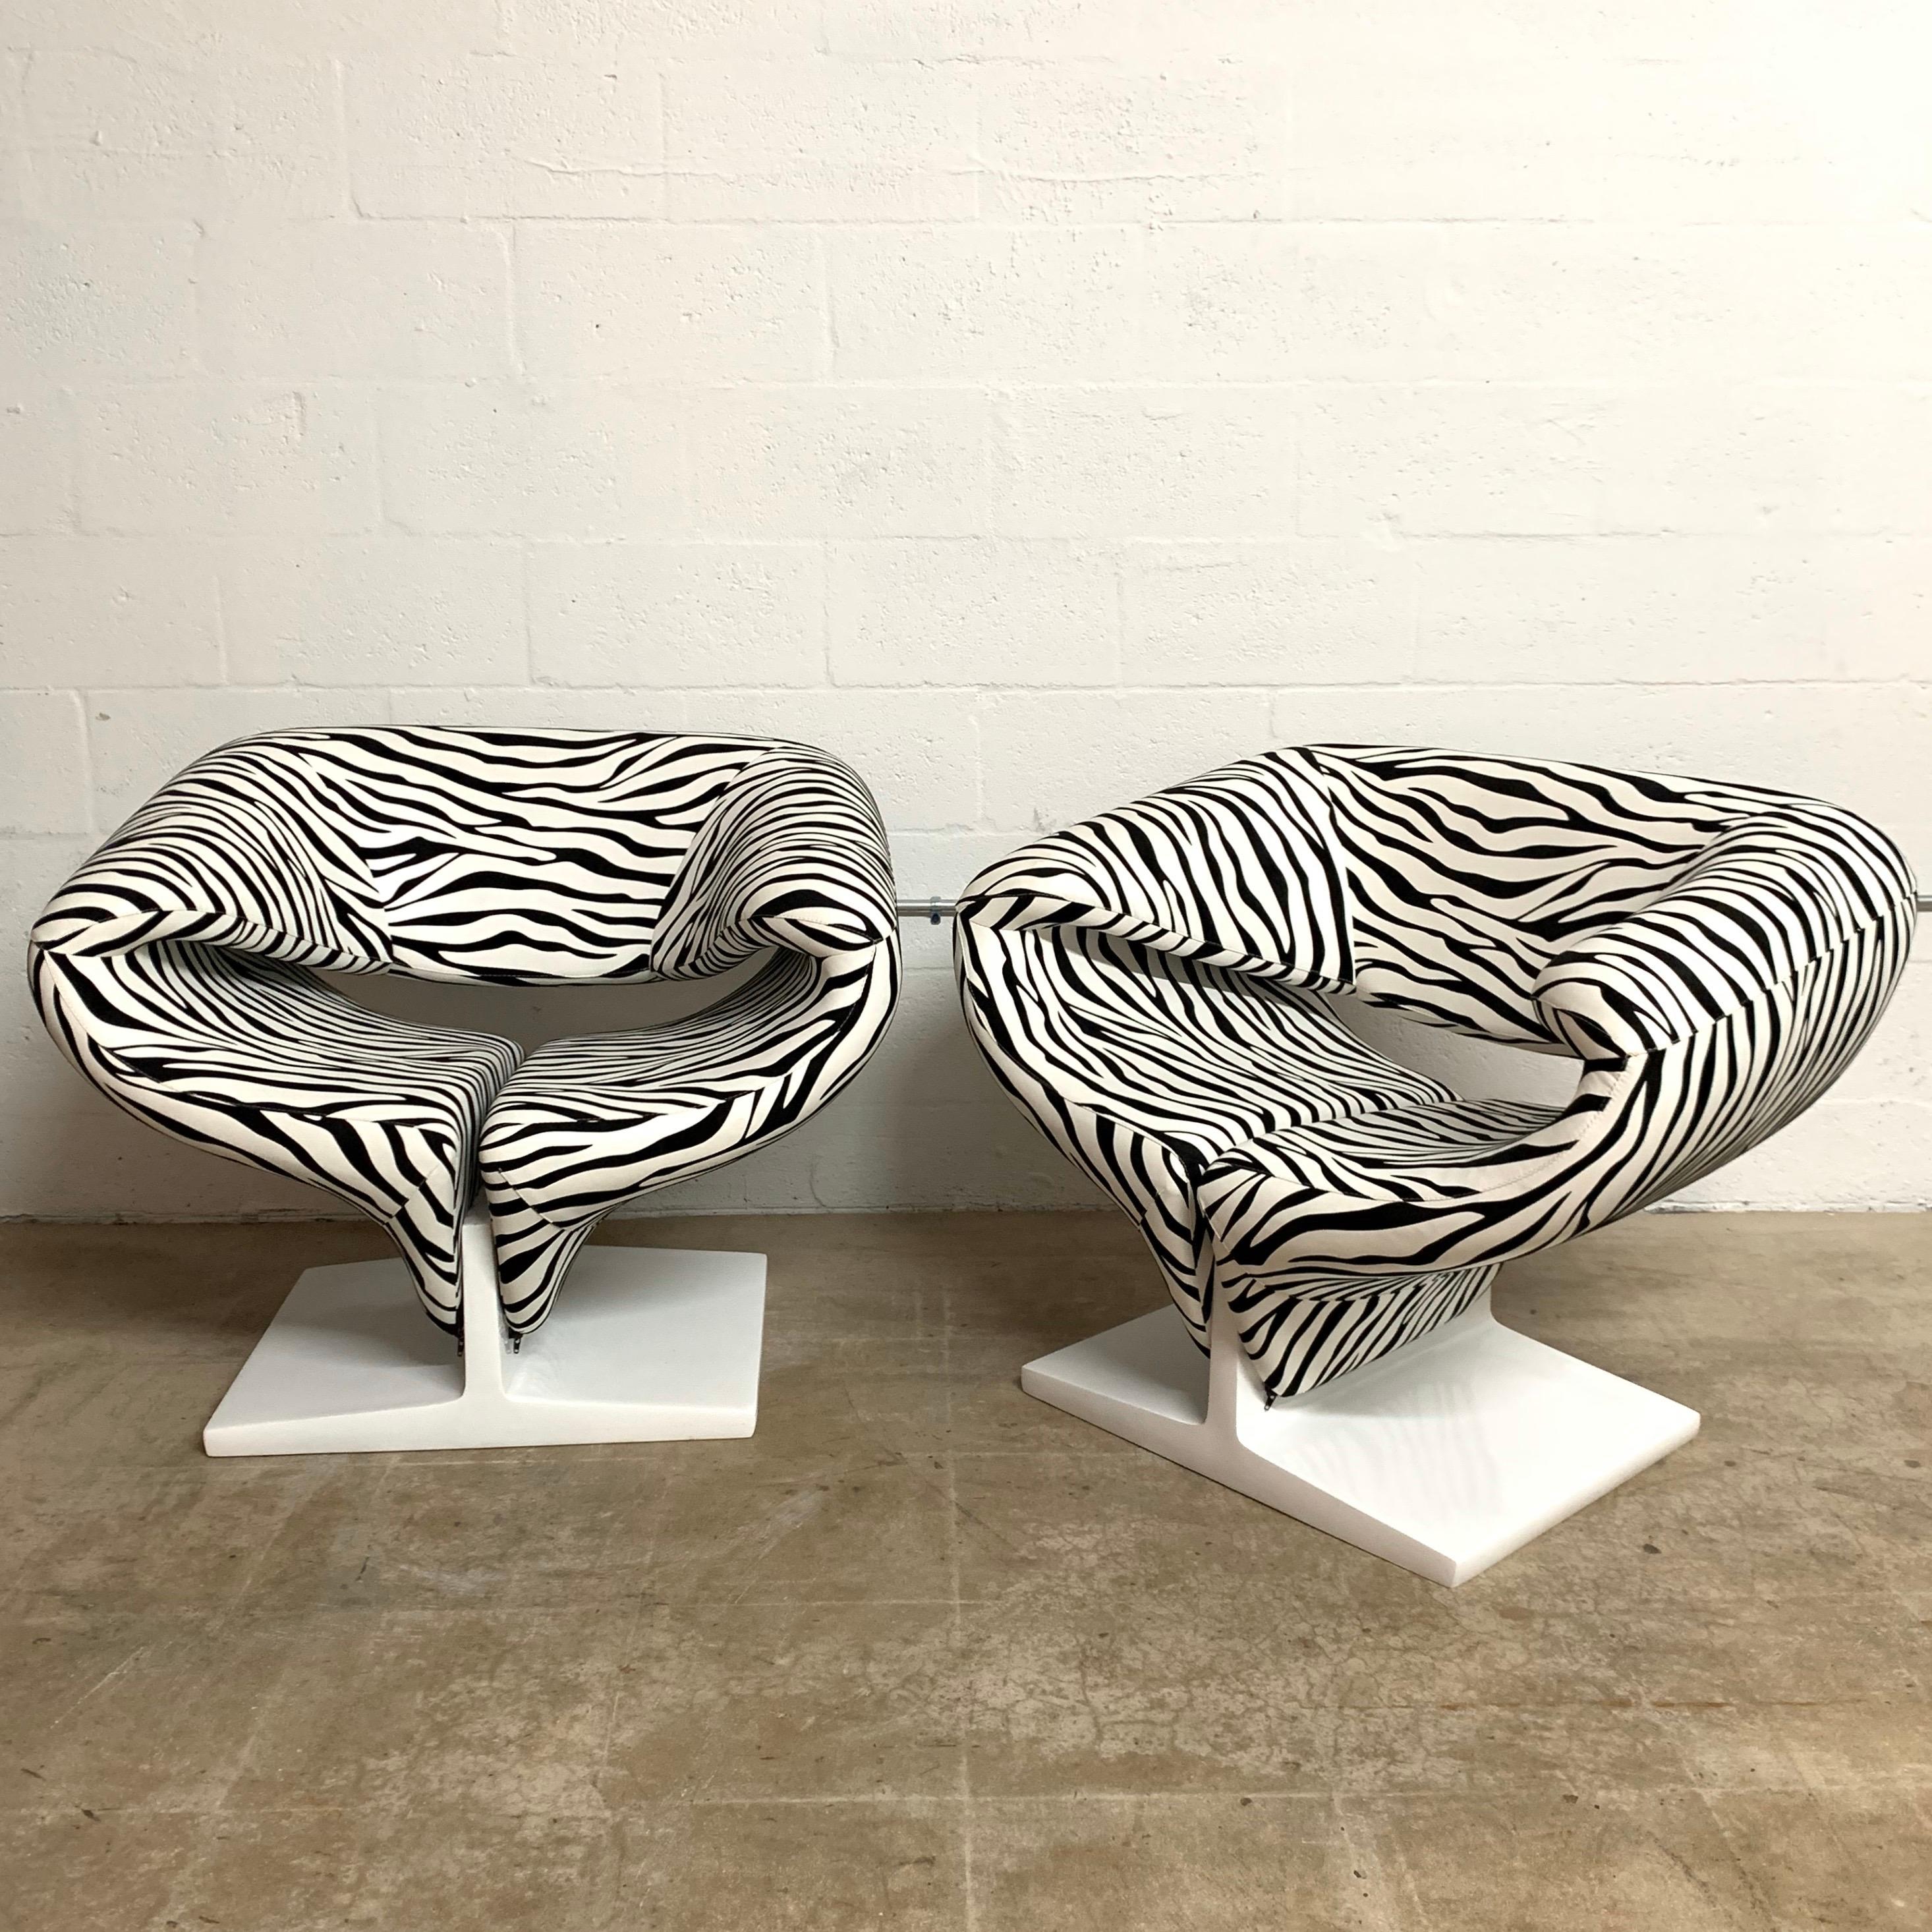 Set of two sculptural Ribbon chairs rendered in Zebra fabric with a white lacquered pressed wood base, designed by Pierre Paulin for Artifort, Netherlands, 1966.